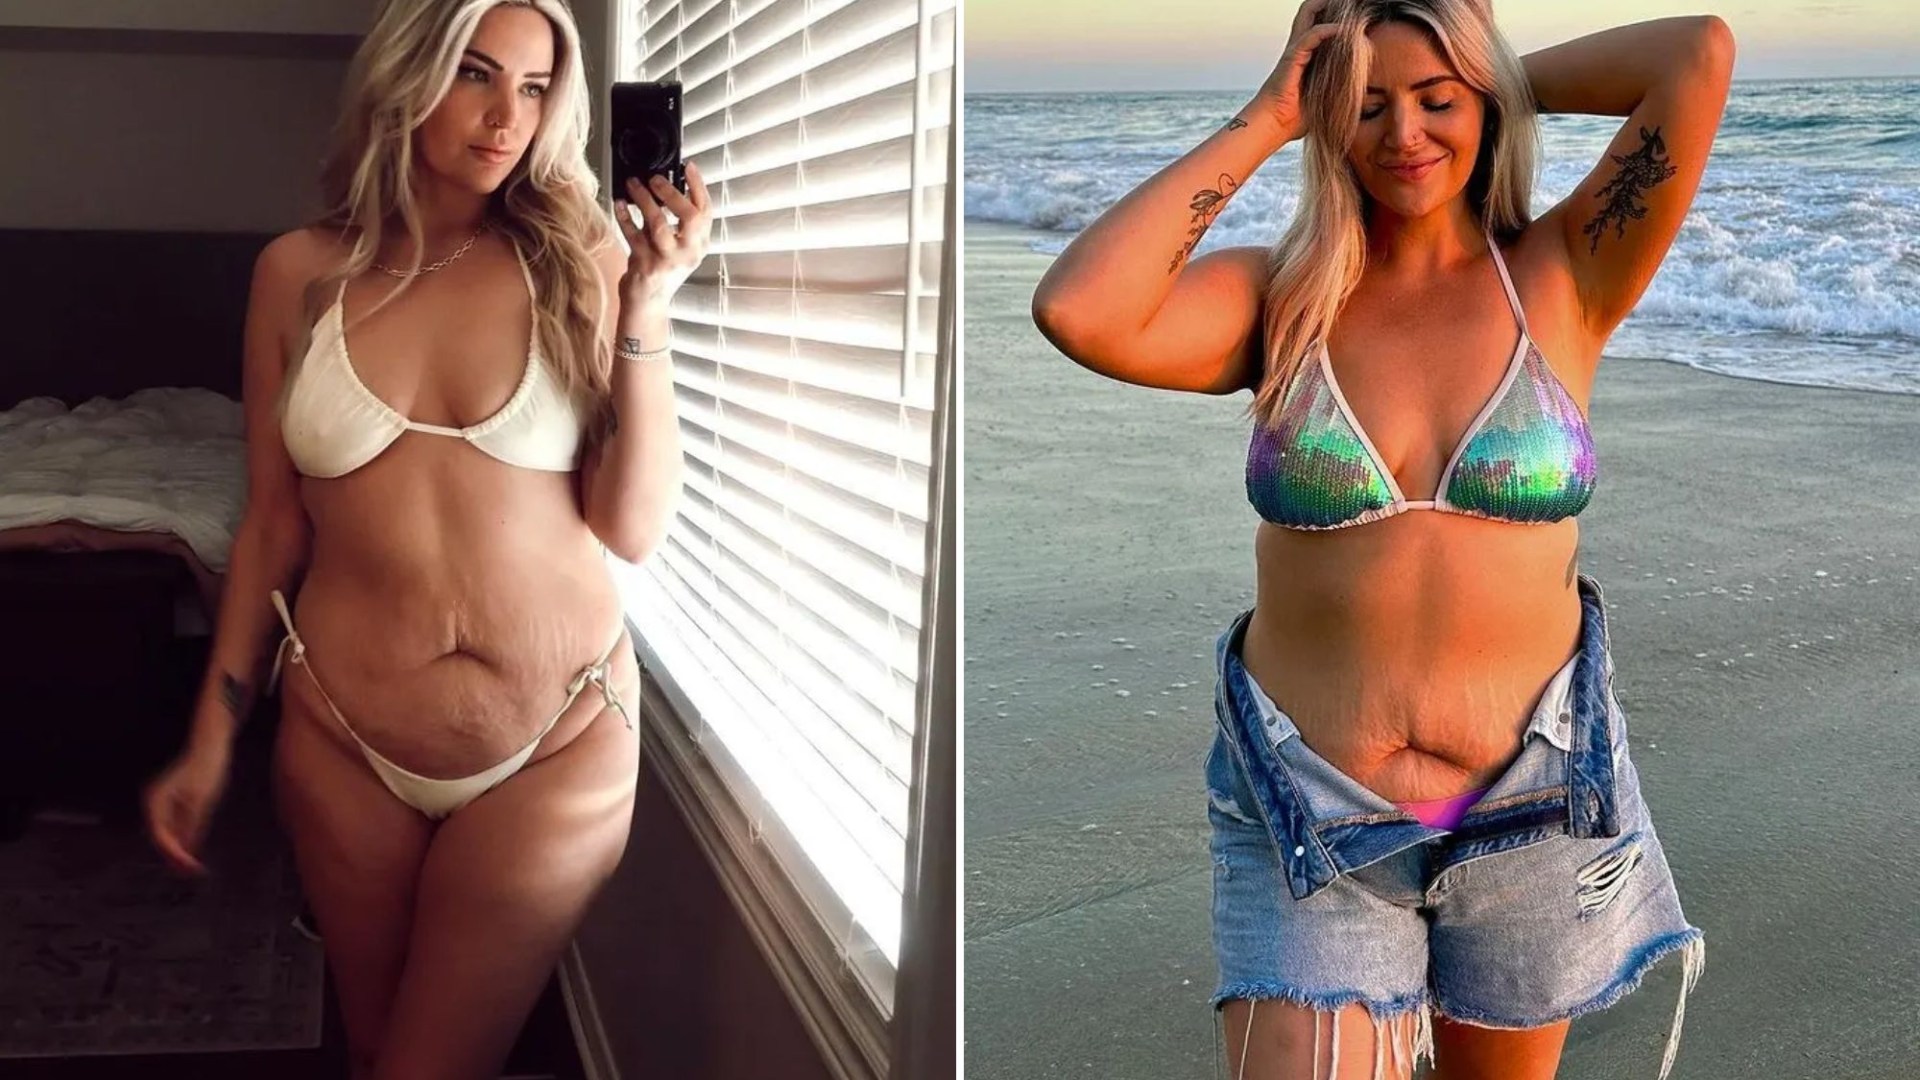 I have stretch marks, cellulite and a belly – I wont stop showing off my real mum bod, men get praised for it [Video]